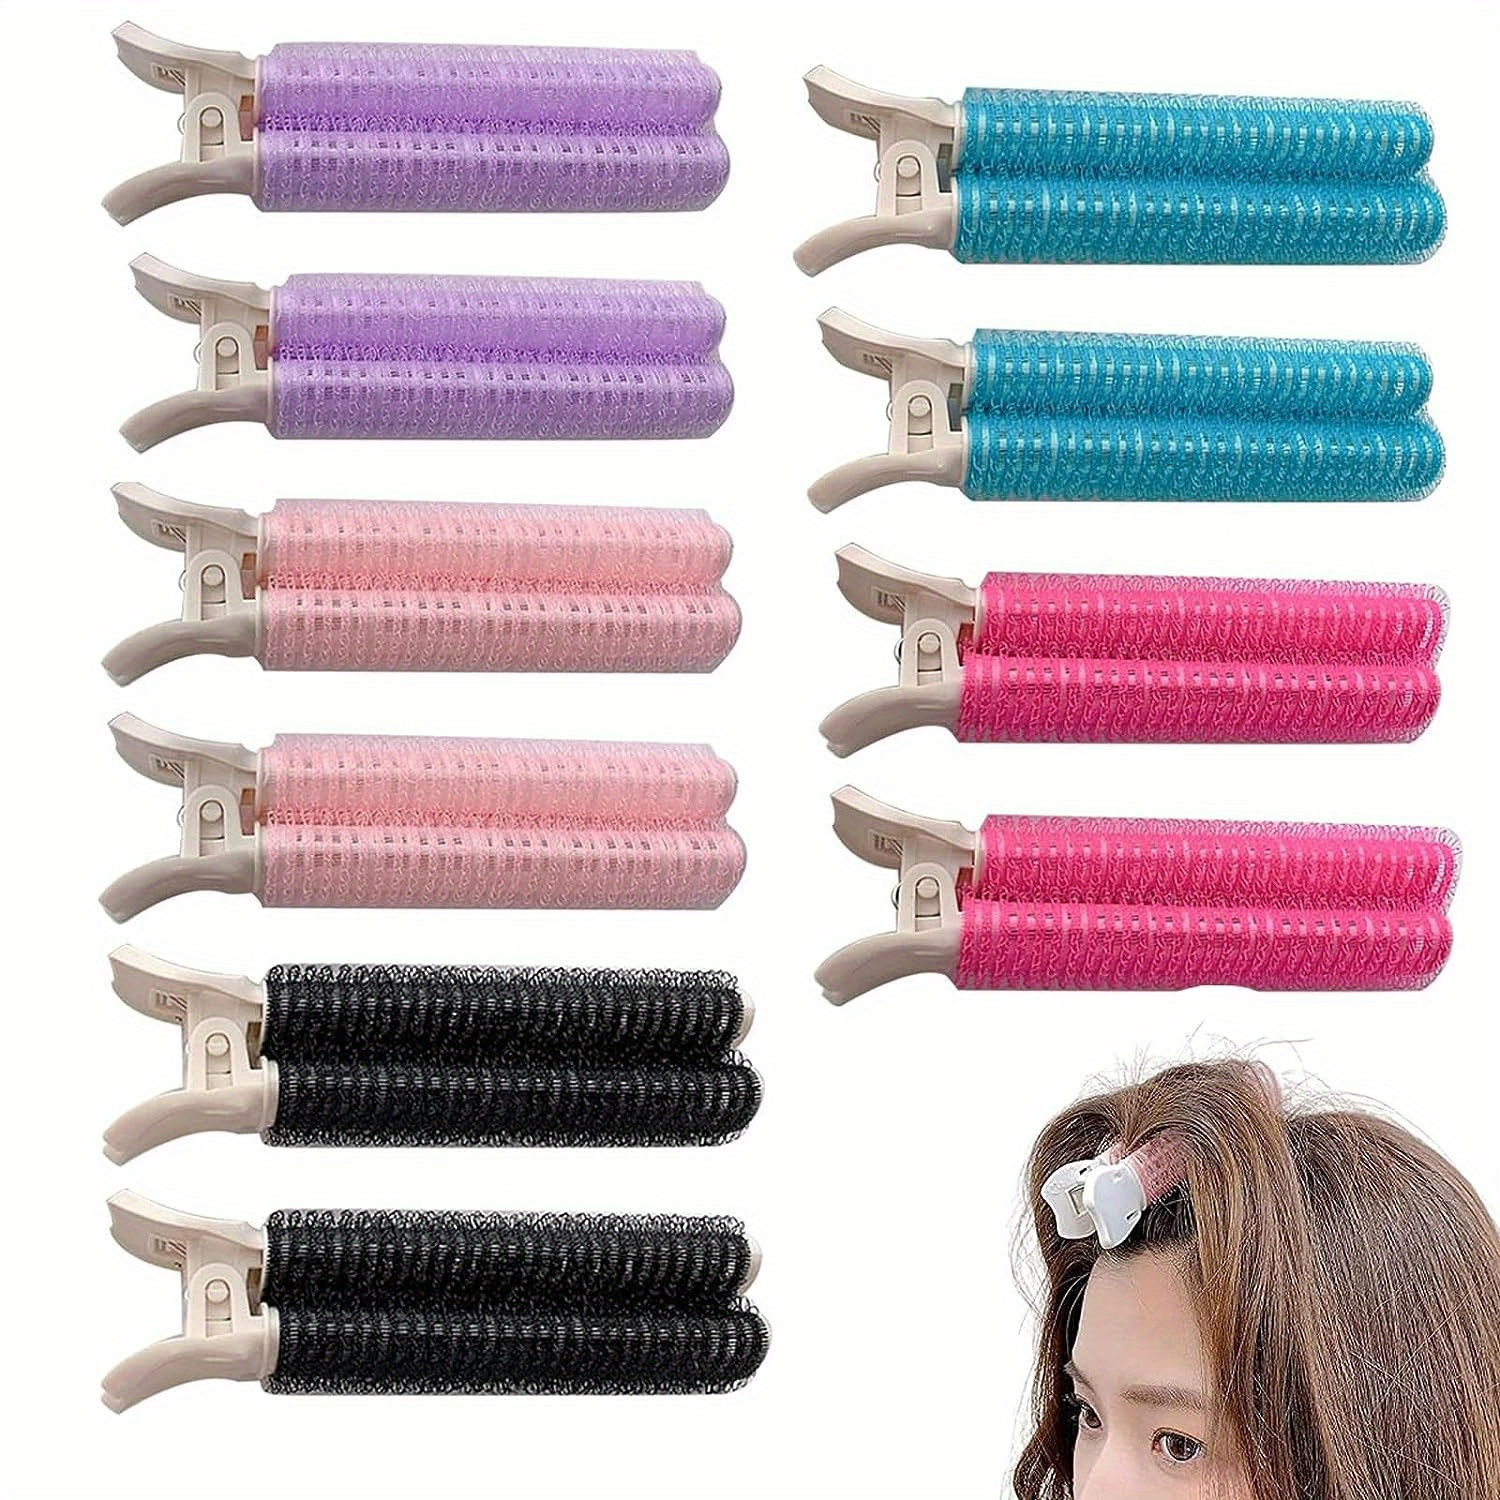 

10pcs/set Volumizing Hair Clips, Root Clips For Hair Volume, Instant Hair Volumizing Clips For Hair Styling